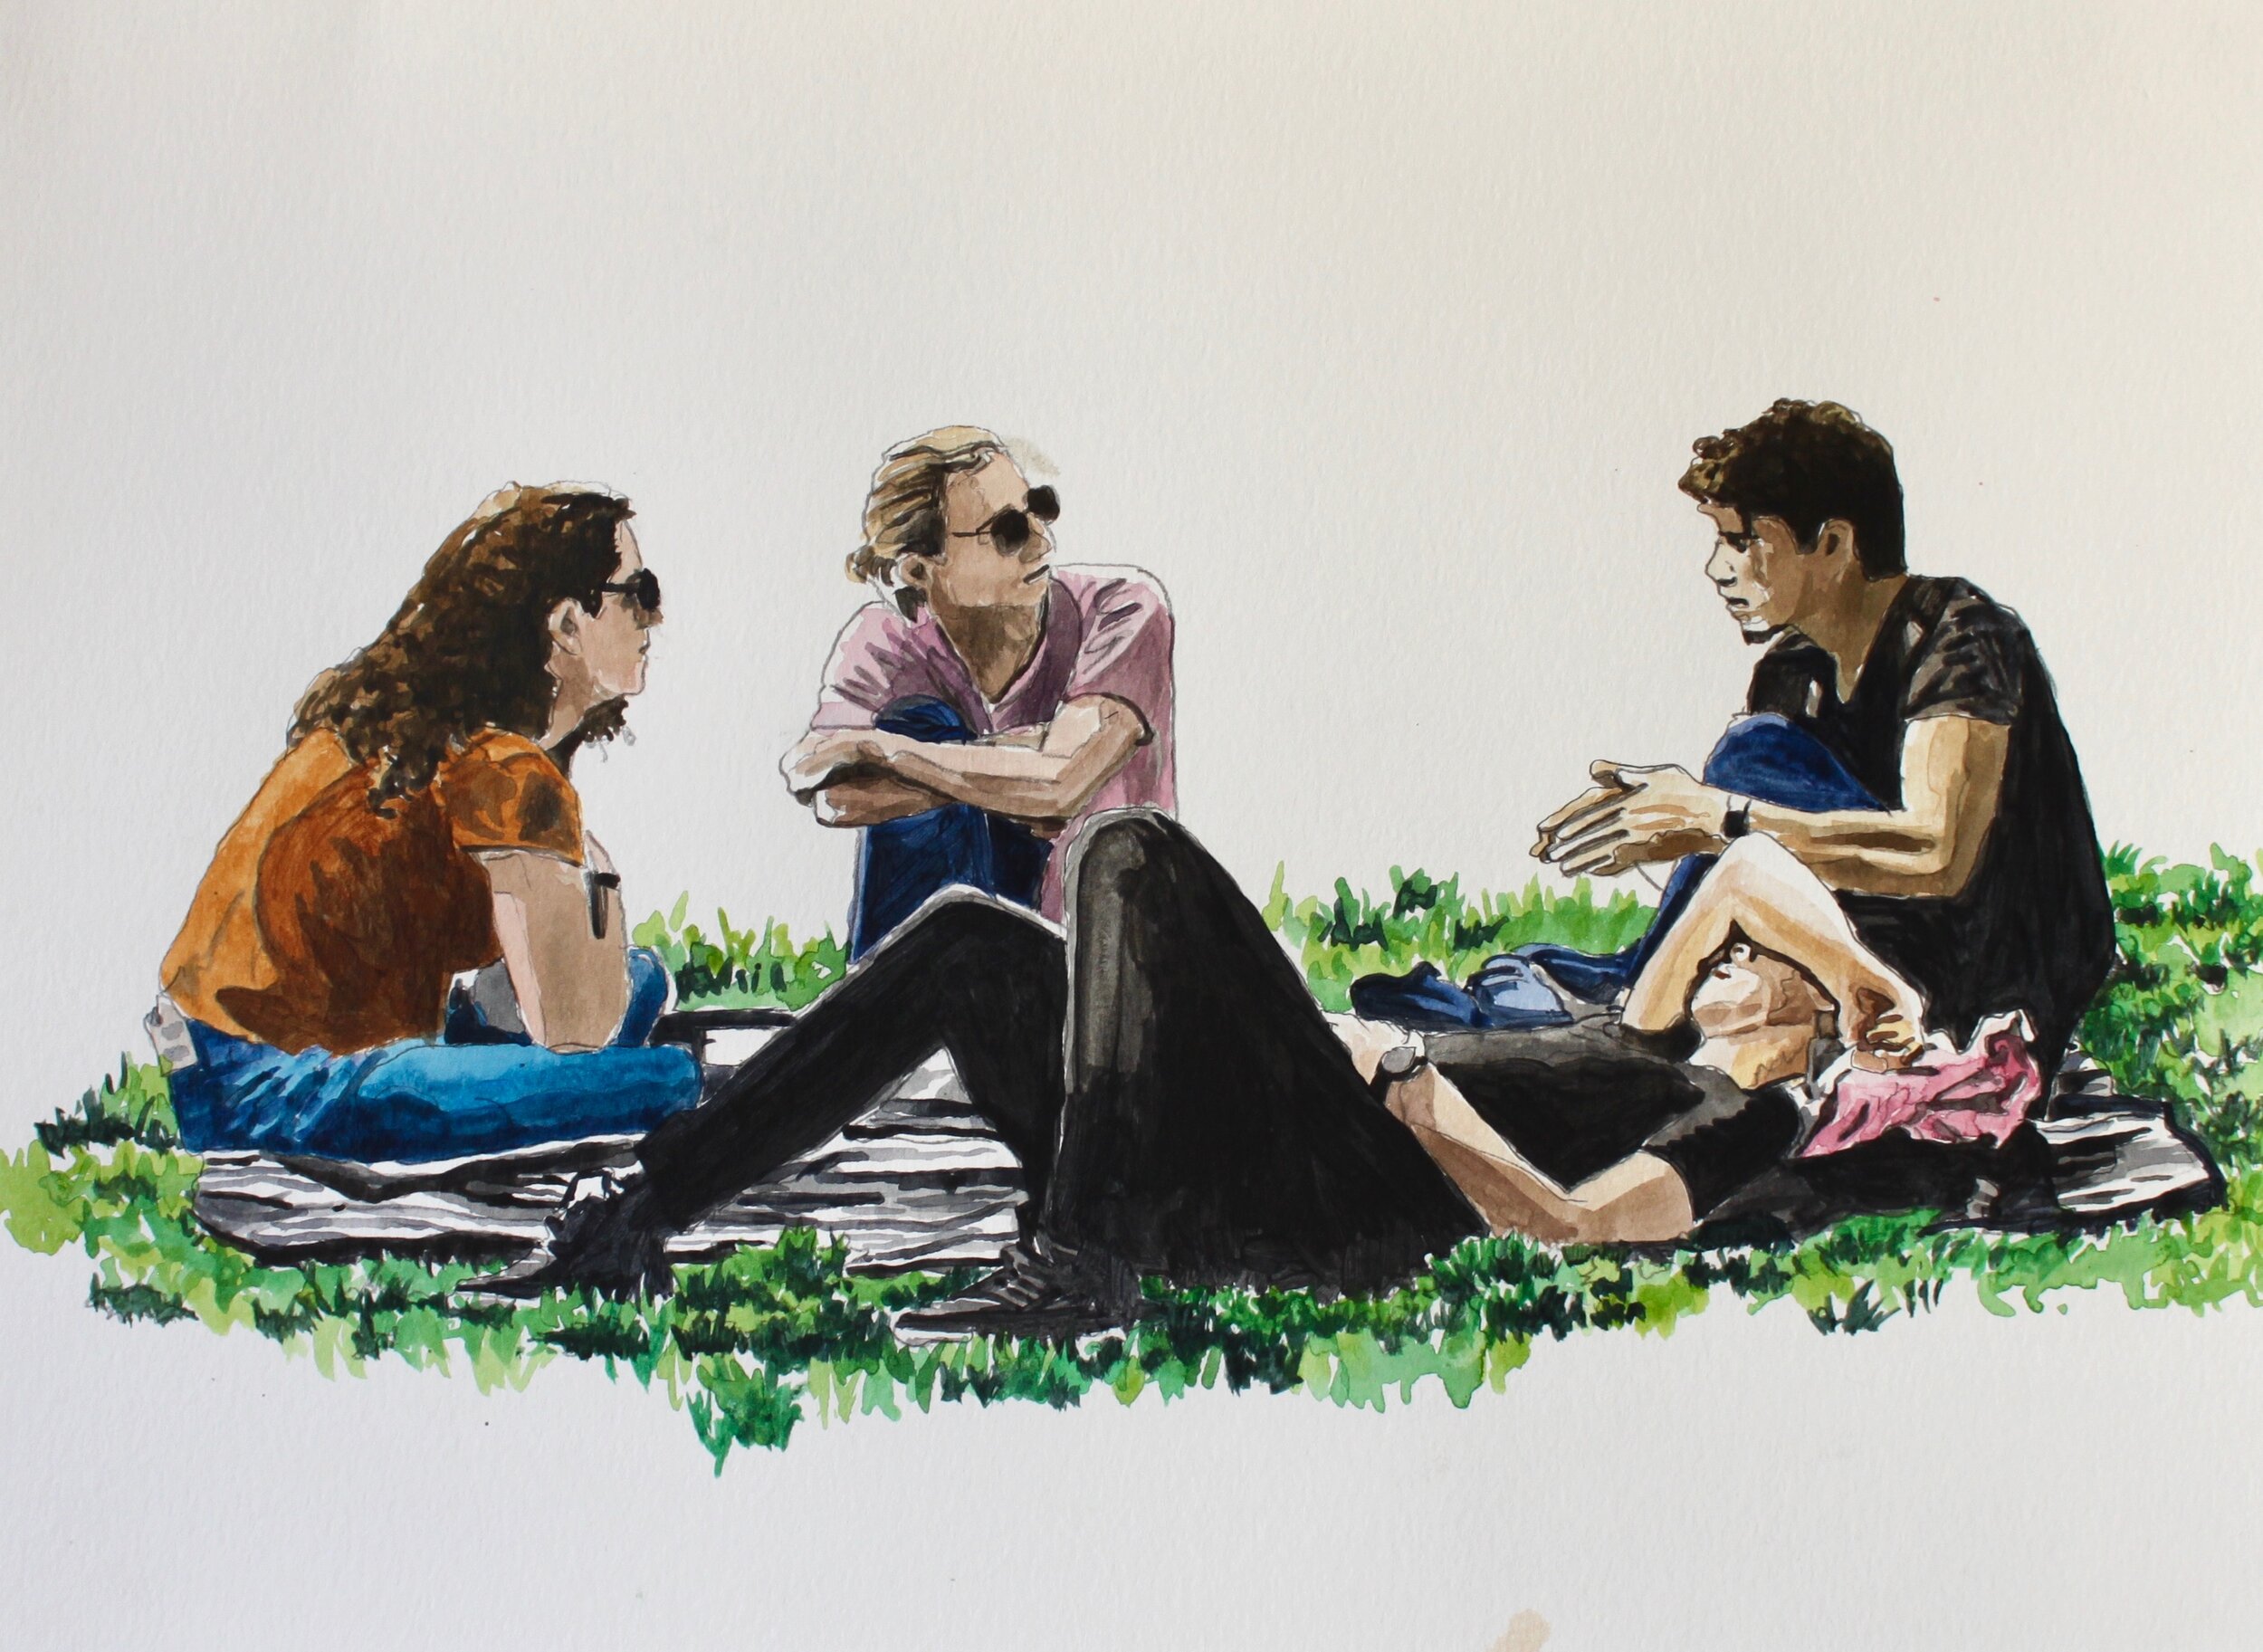 Untitled, People on the Grass, 2020, 11 x 15, acrylic on paper